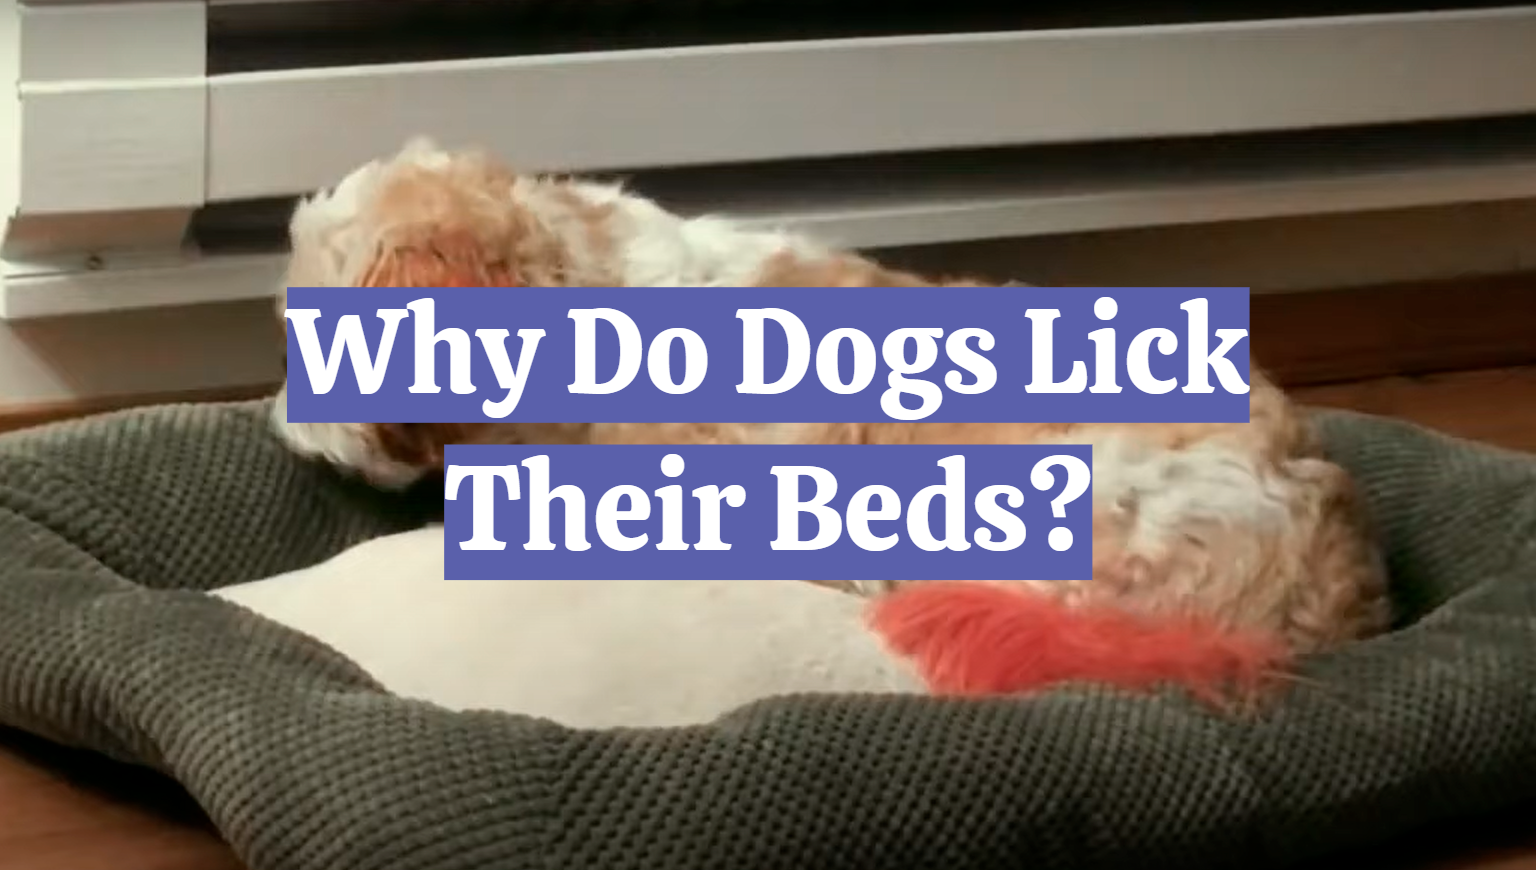 Why Do Dogs Lick Their Beds?